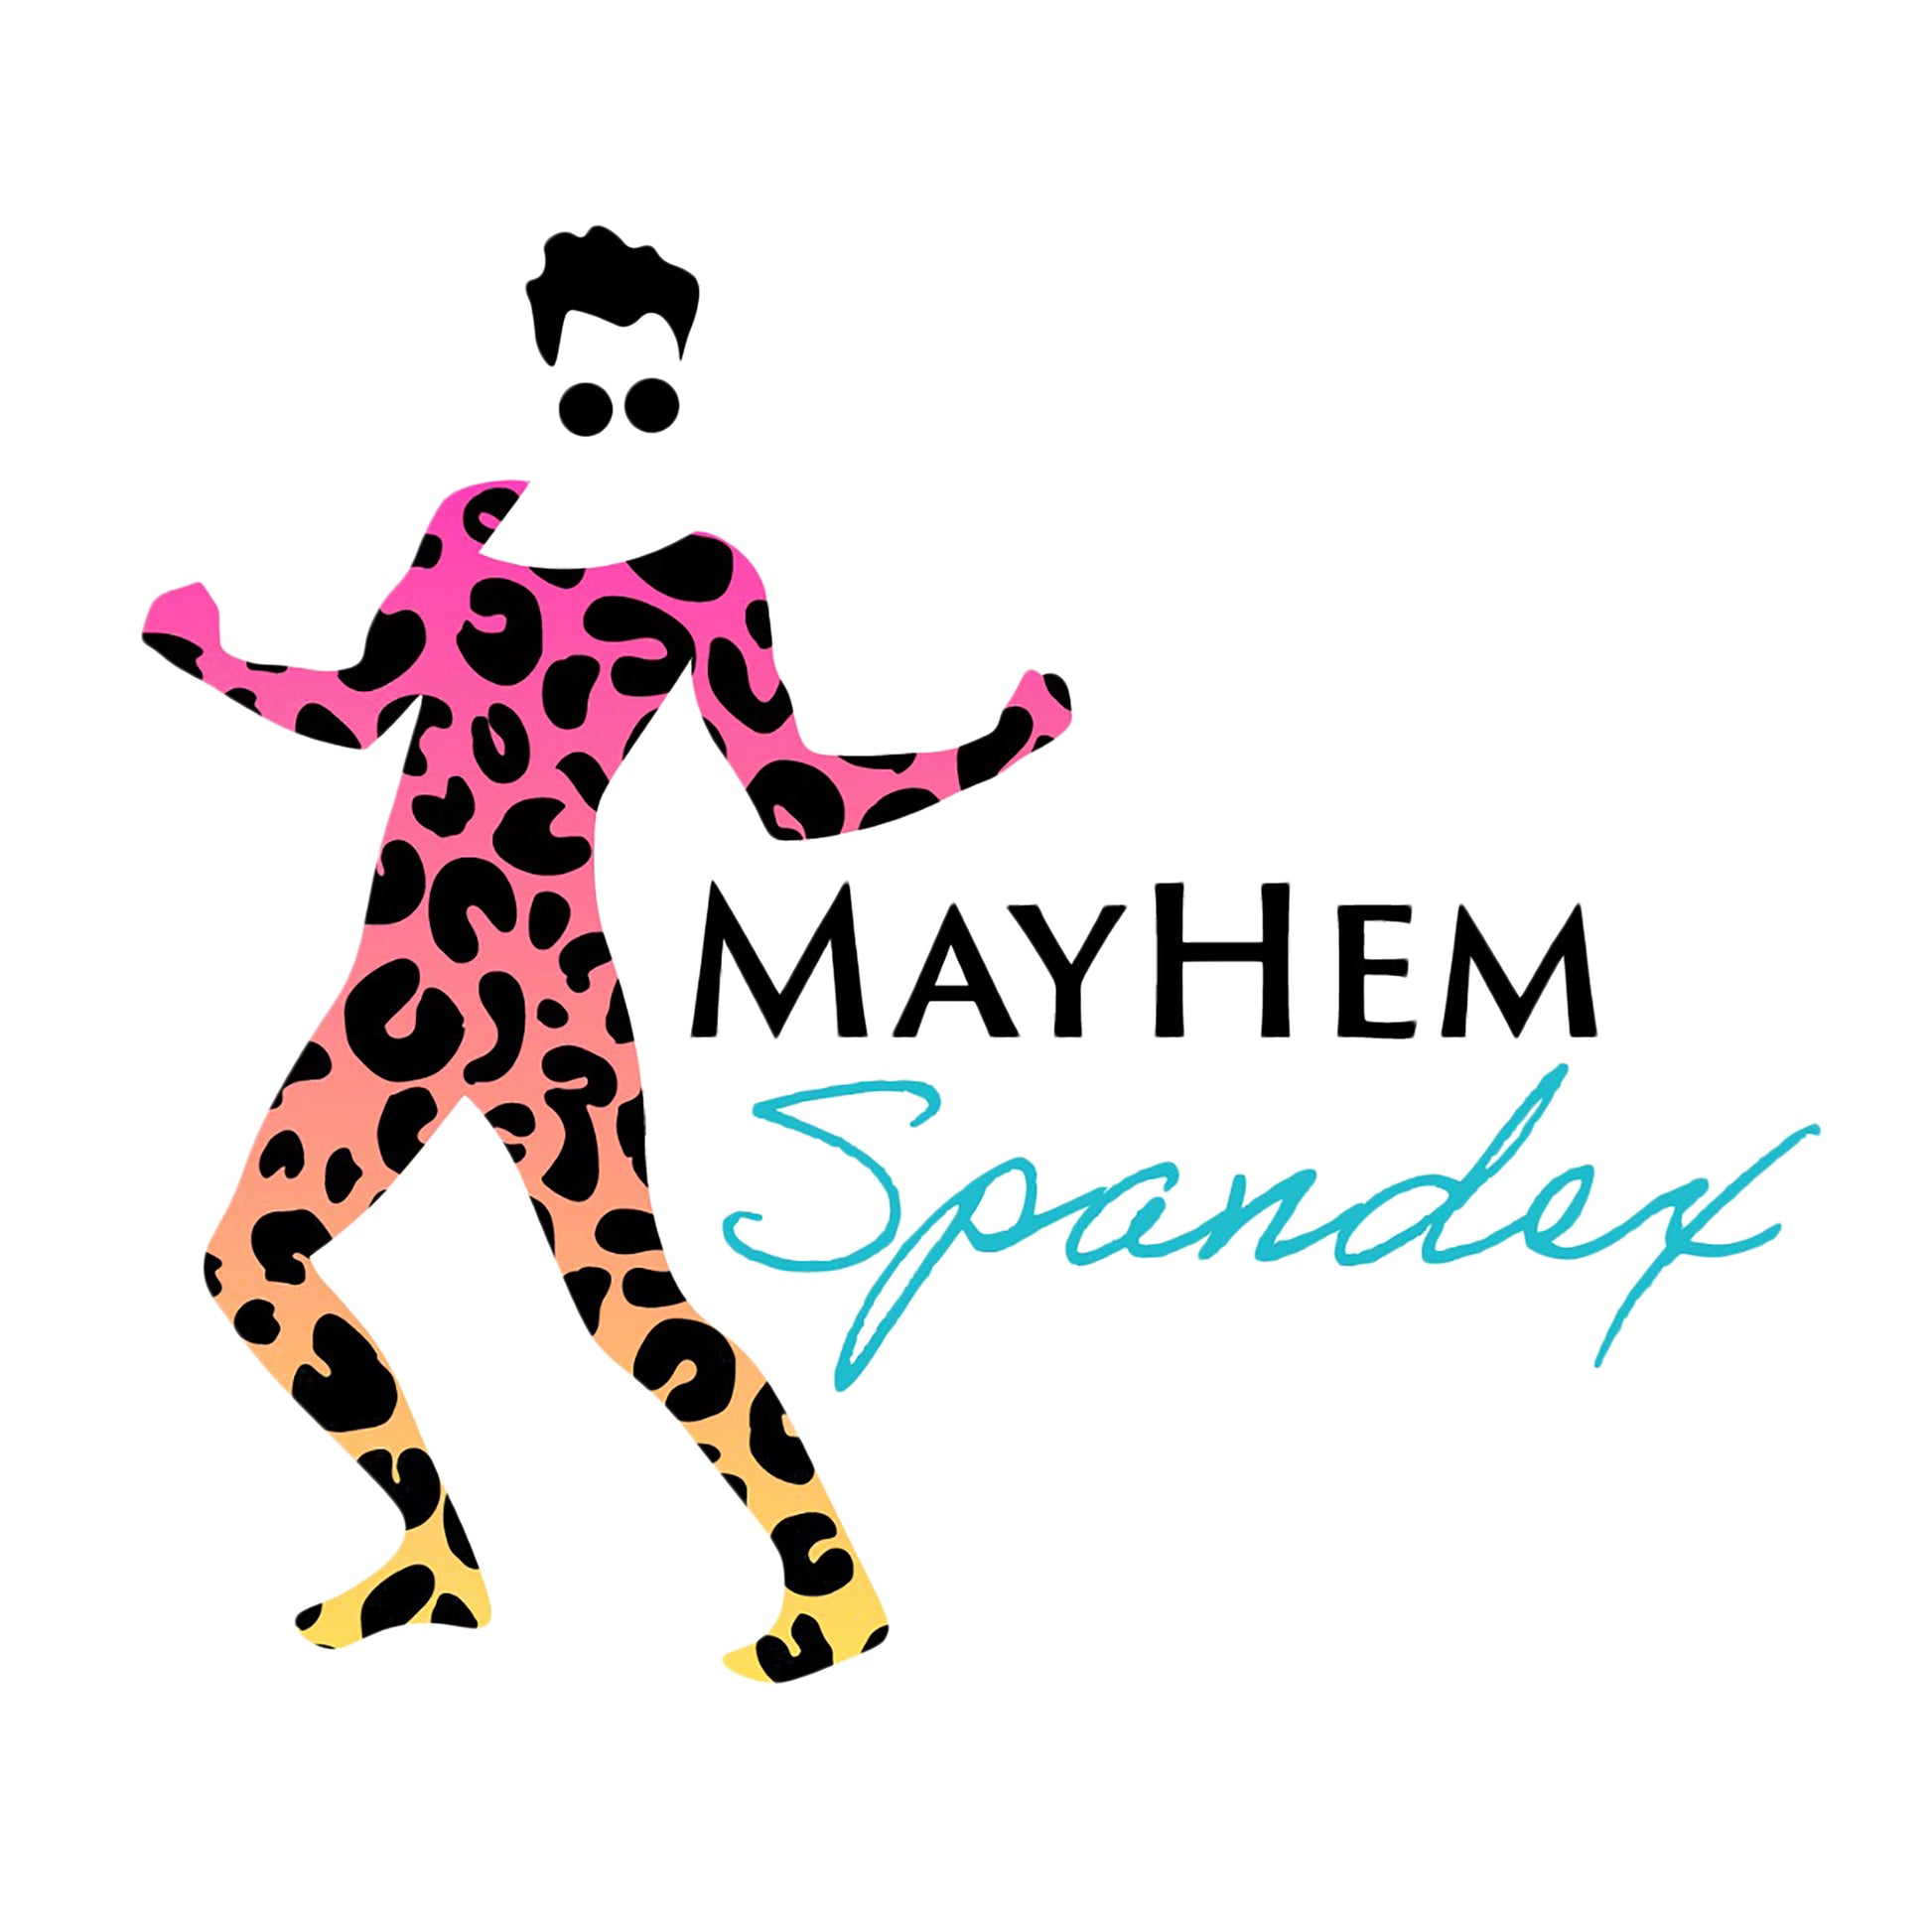 Shopping for someone special but also want to give them the gift of choice? Give them a Mayhem gift card. The image is the Mayhem logo that features a simple vector drawing silhouette of a model posing with arms outstretched to the sides flexing their guns in a leopard print catsuit. The only facial features shown are hair and round glasses. The words Mayhem spandex are next to the figure in bold black and turquoise text. 